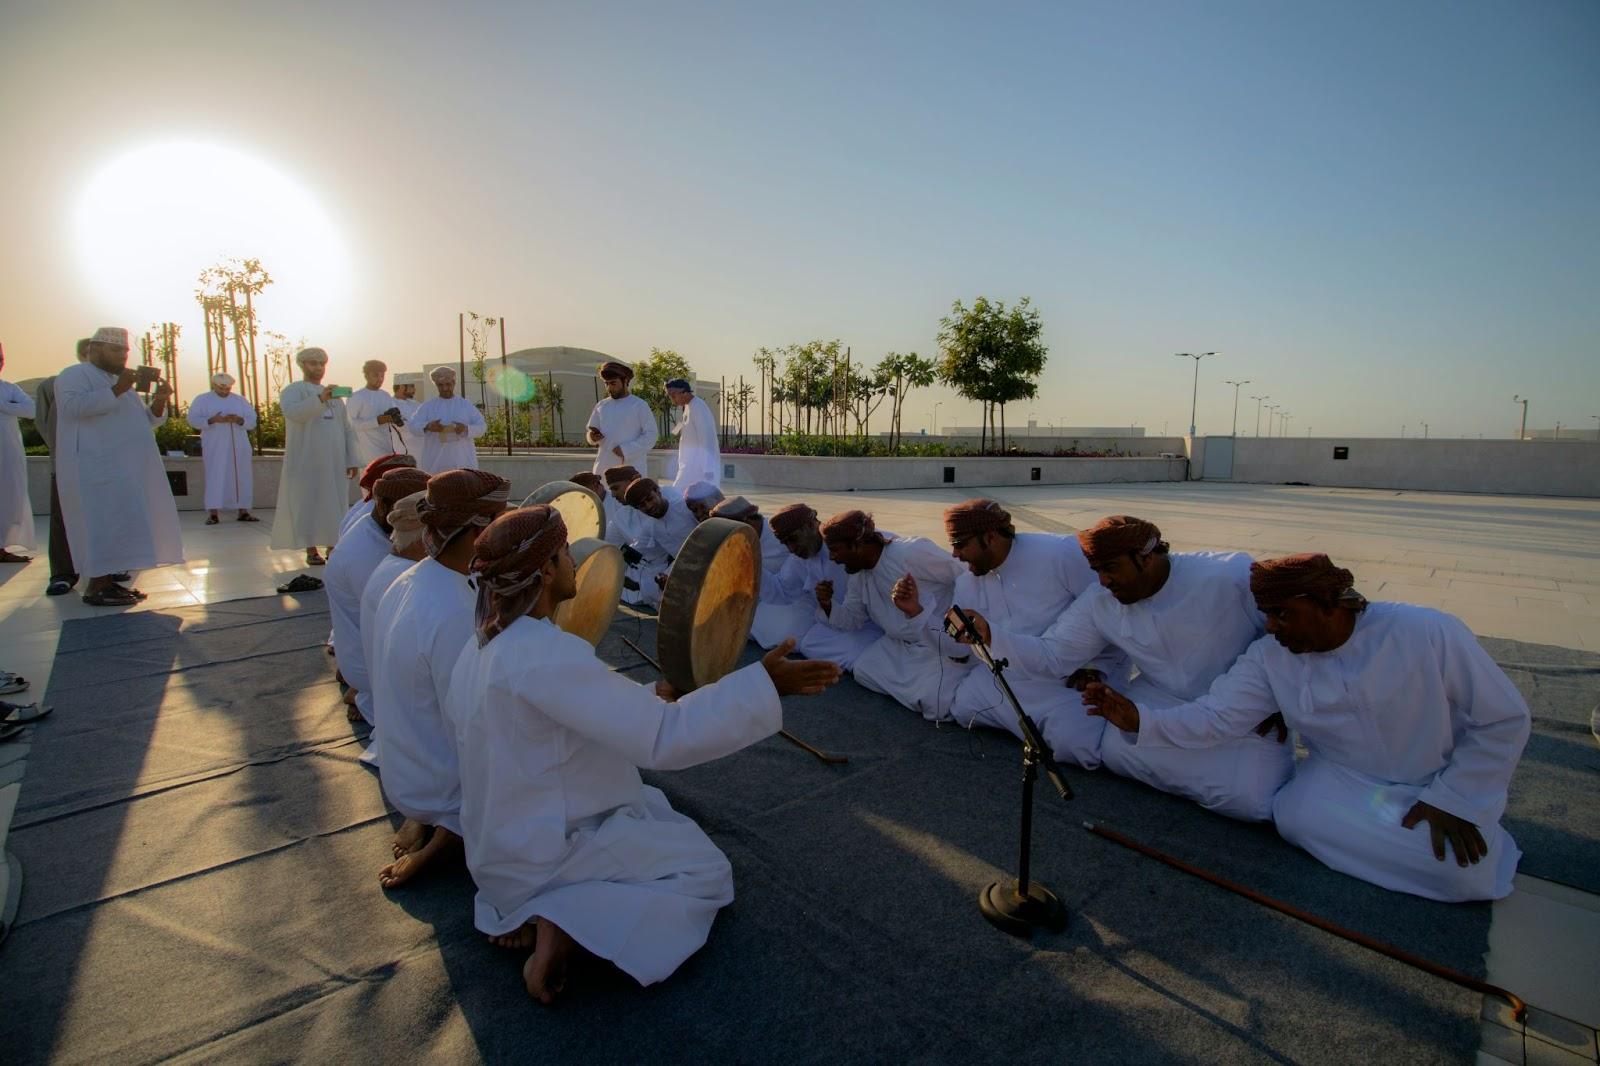 muscat, Oman, people playing instruments.